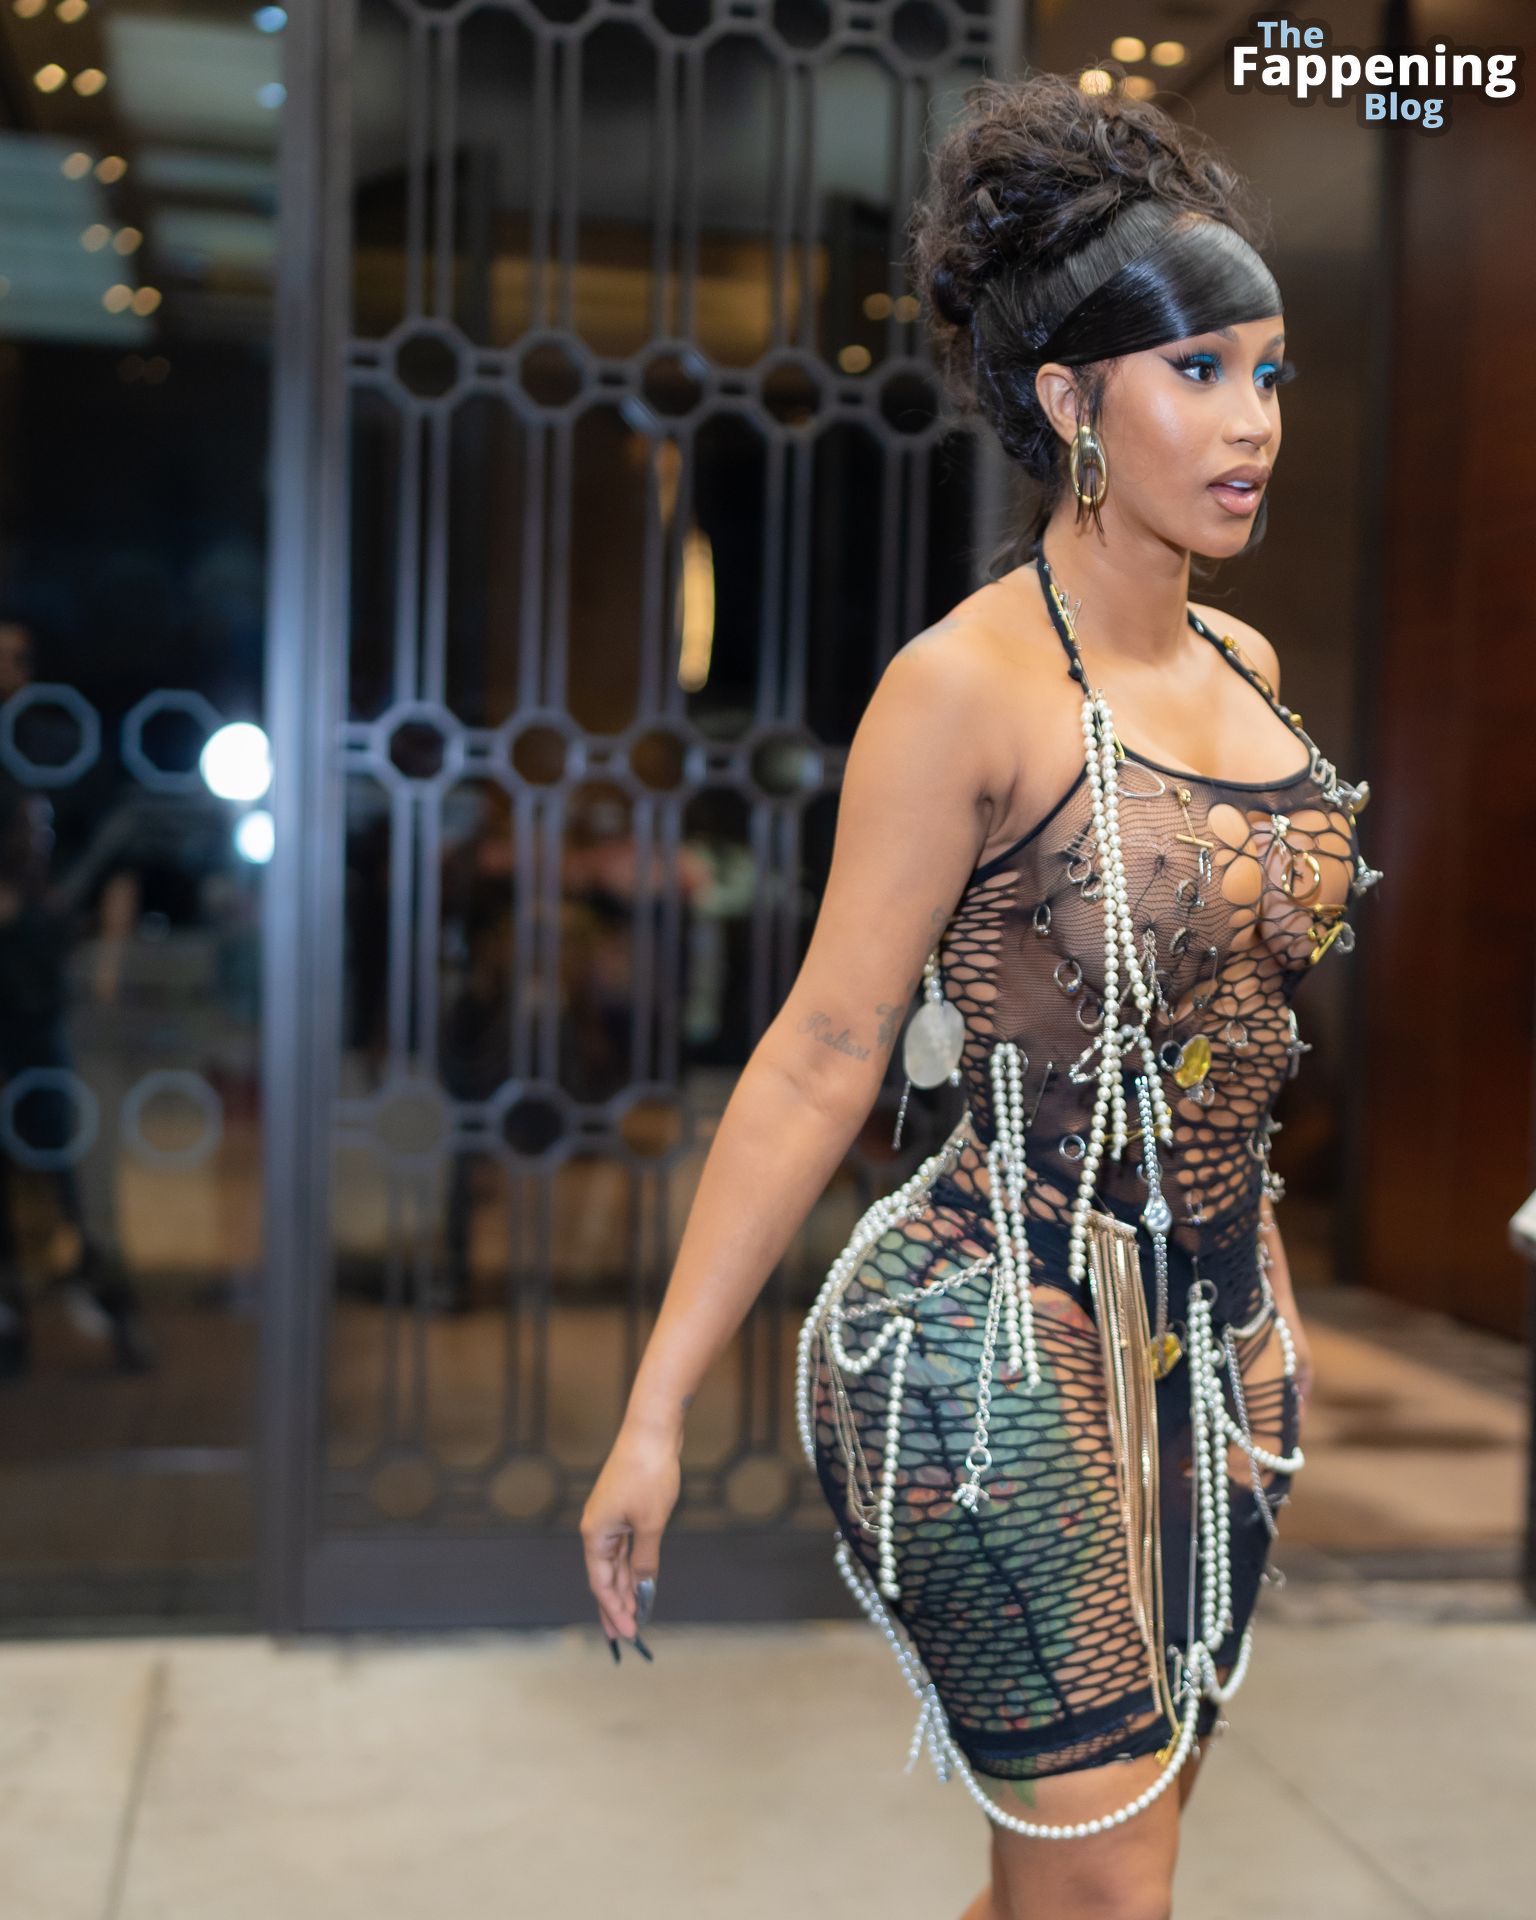 Cardi B Displays Her Curves in a Hot Outfit in New York (13 Photos)